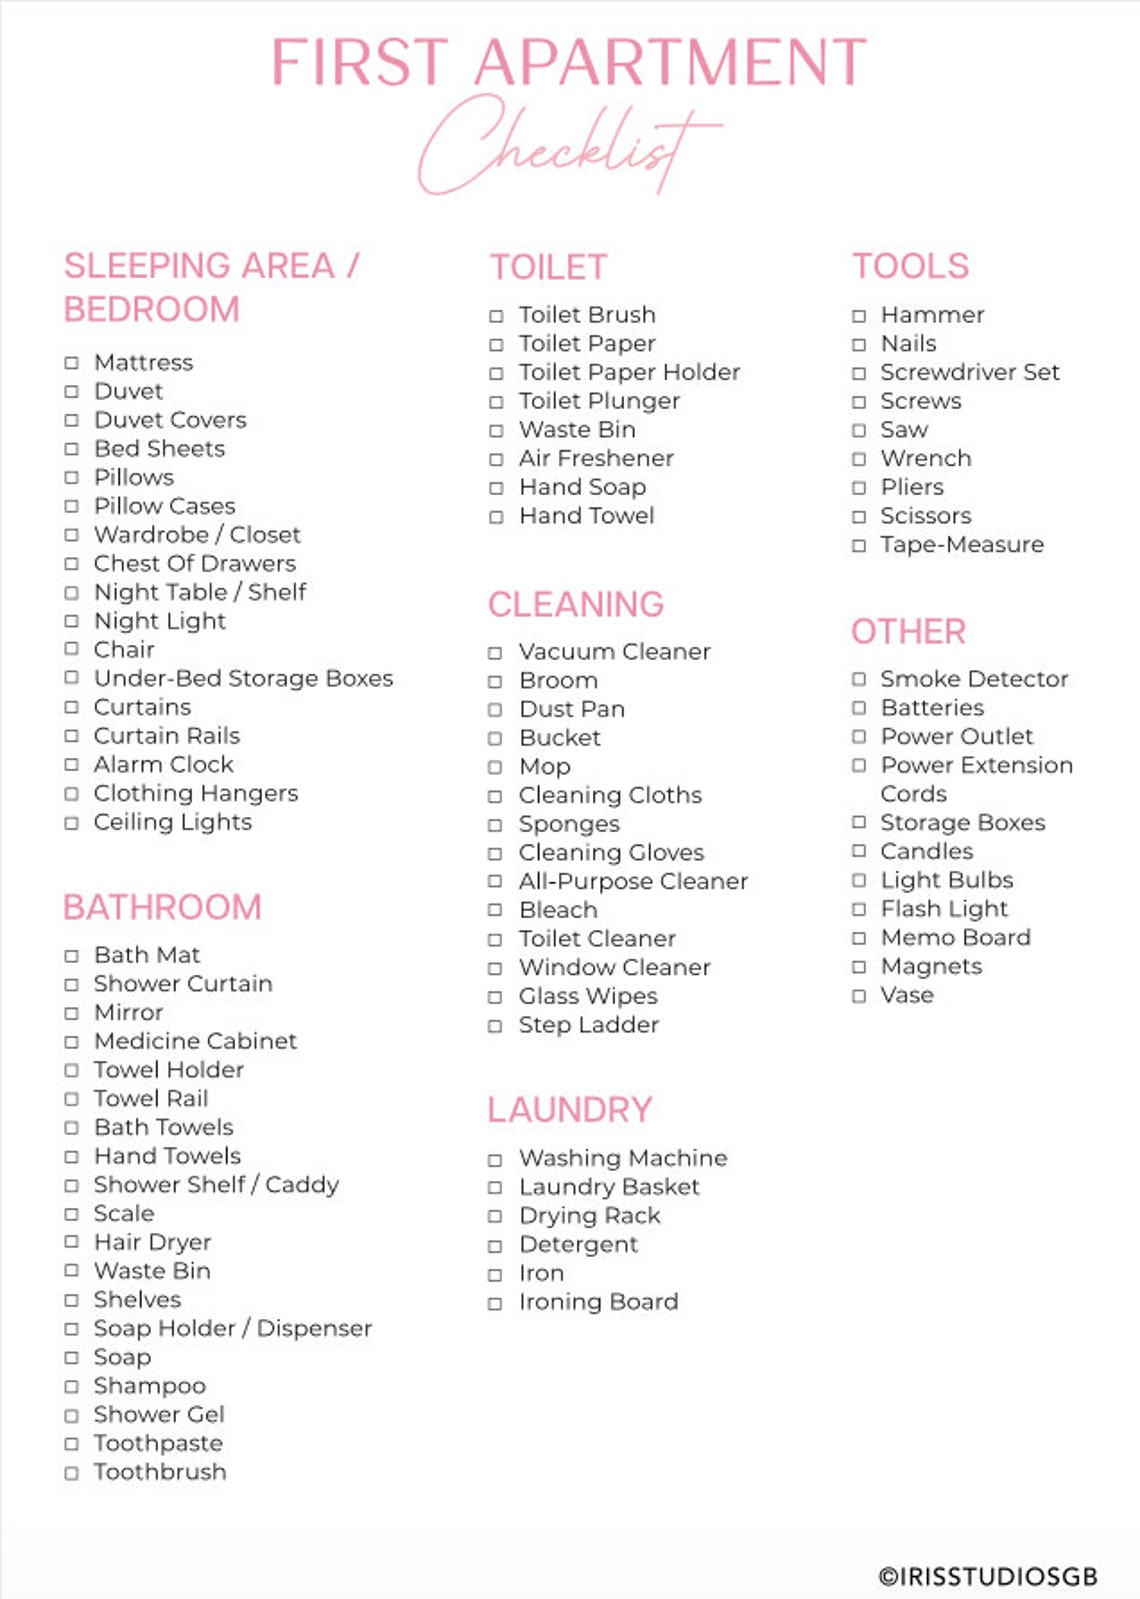 First Apartment Checklist New Home Checklist New Home - Etsy UK